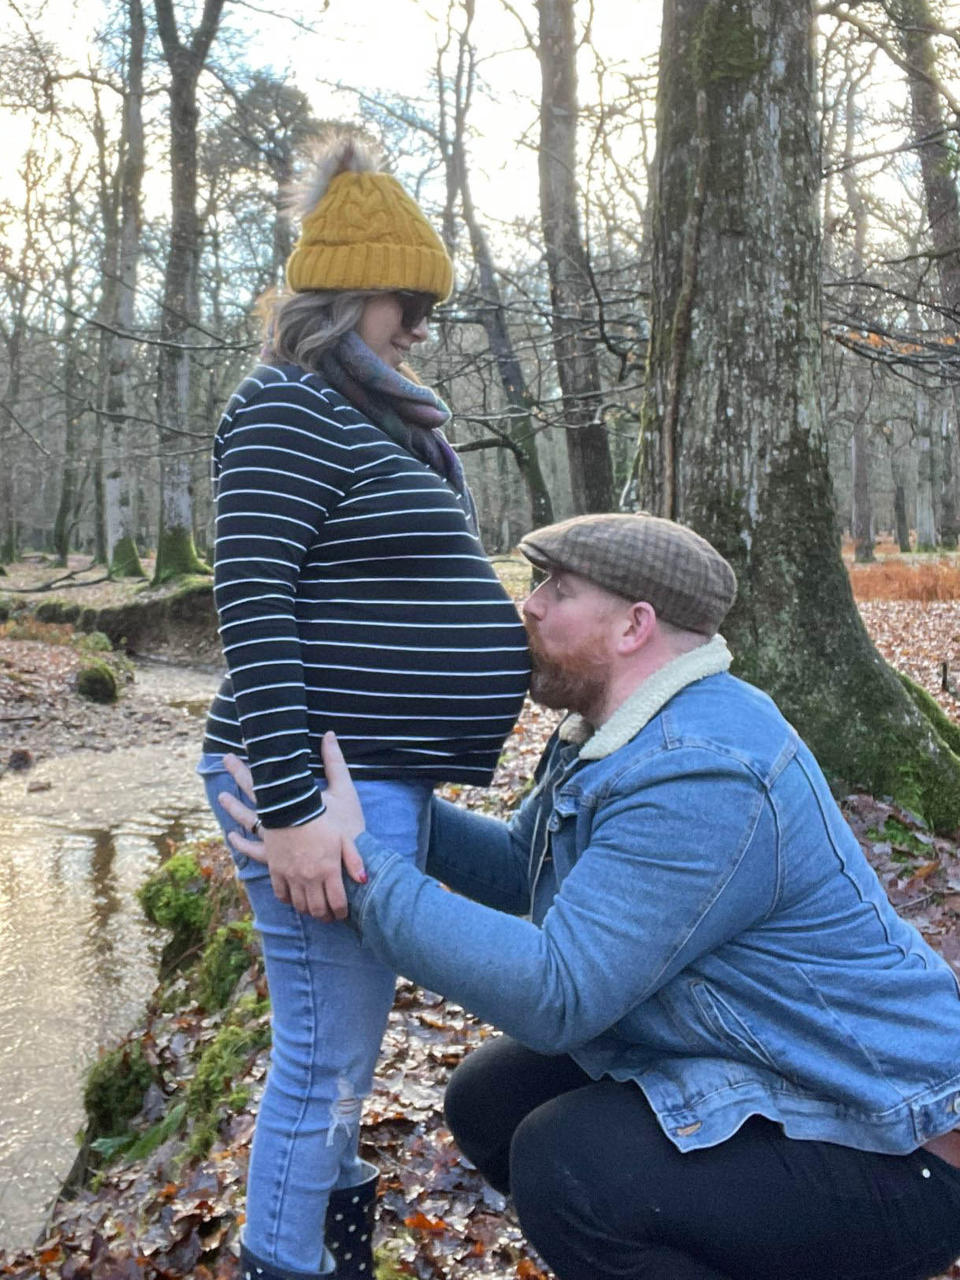 The couple were thrilled to discover they were pregnant after a financial contribution from a stranger. (Jennifer Blandford/Caters)